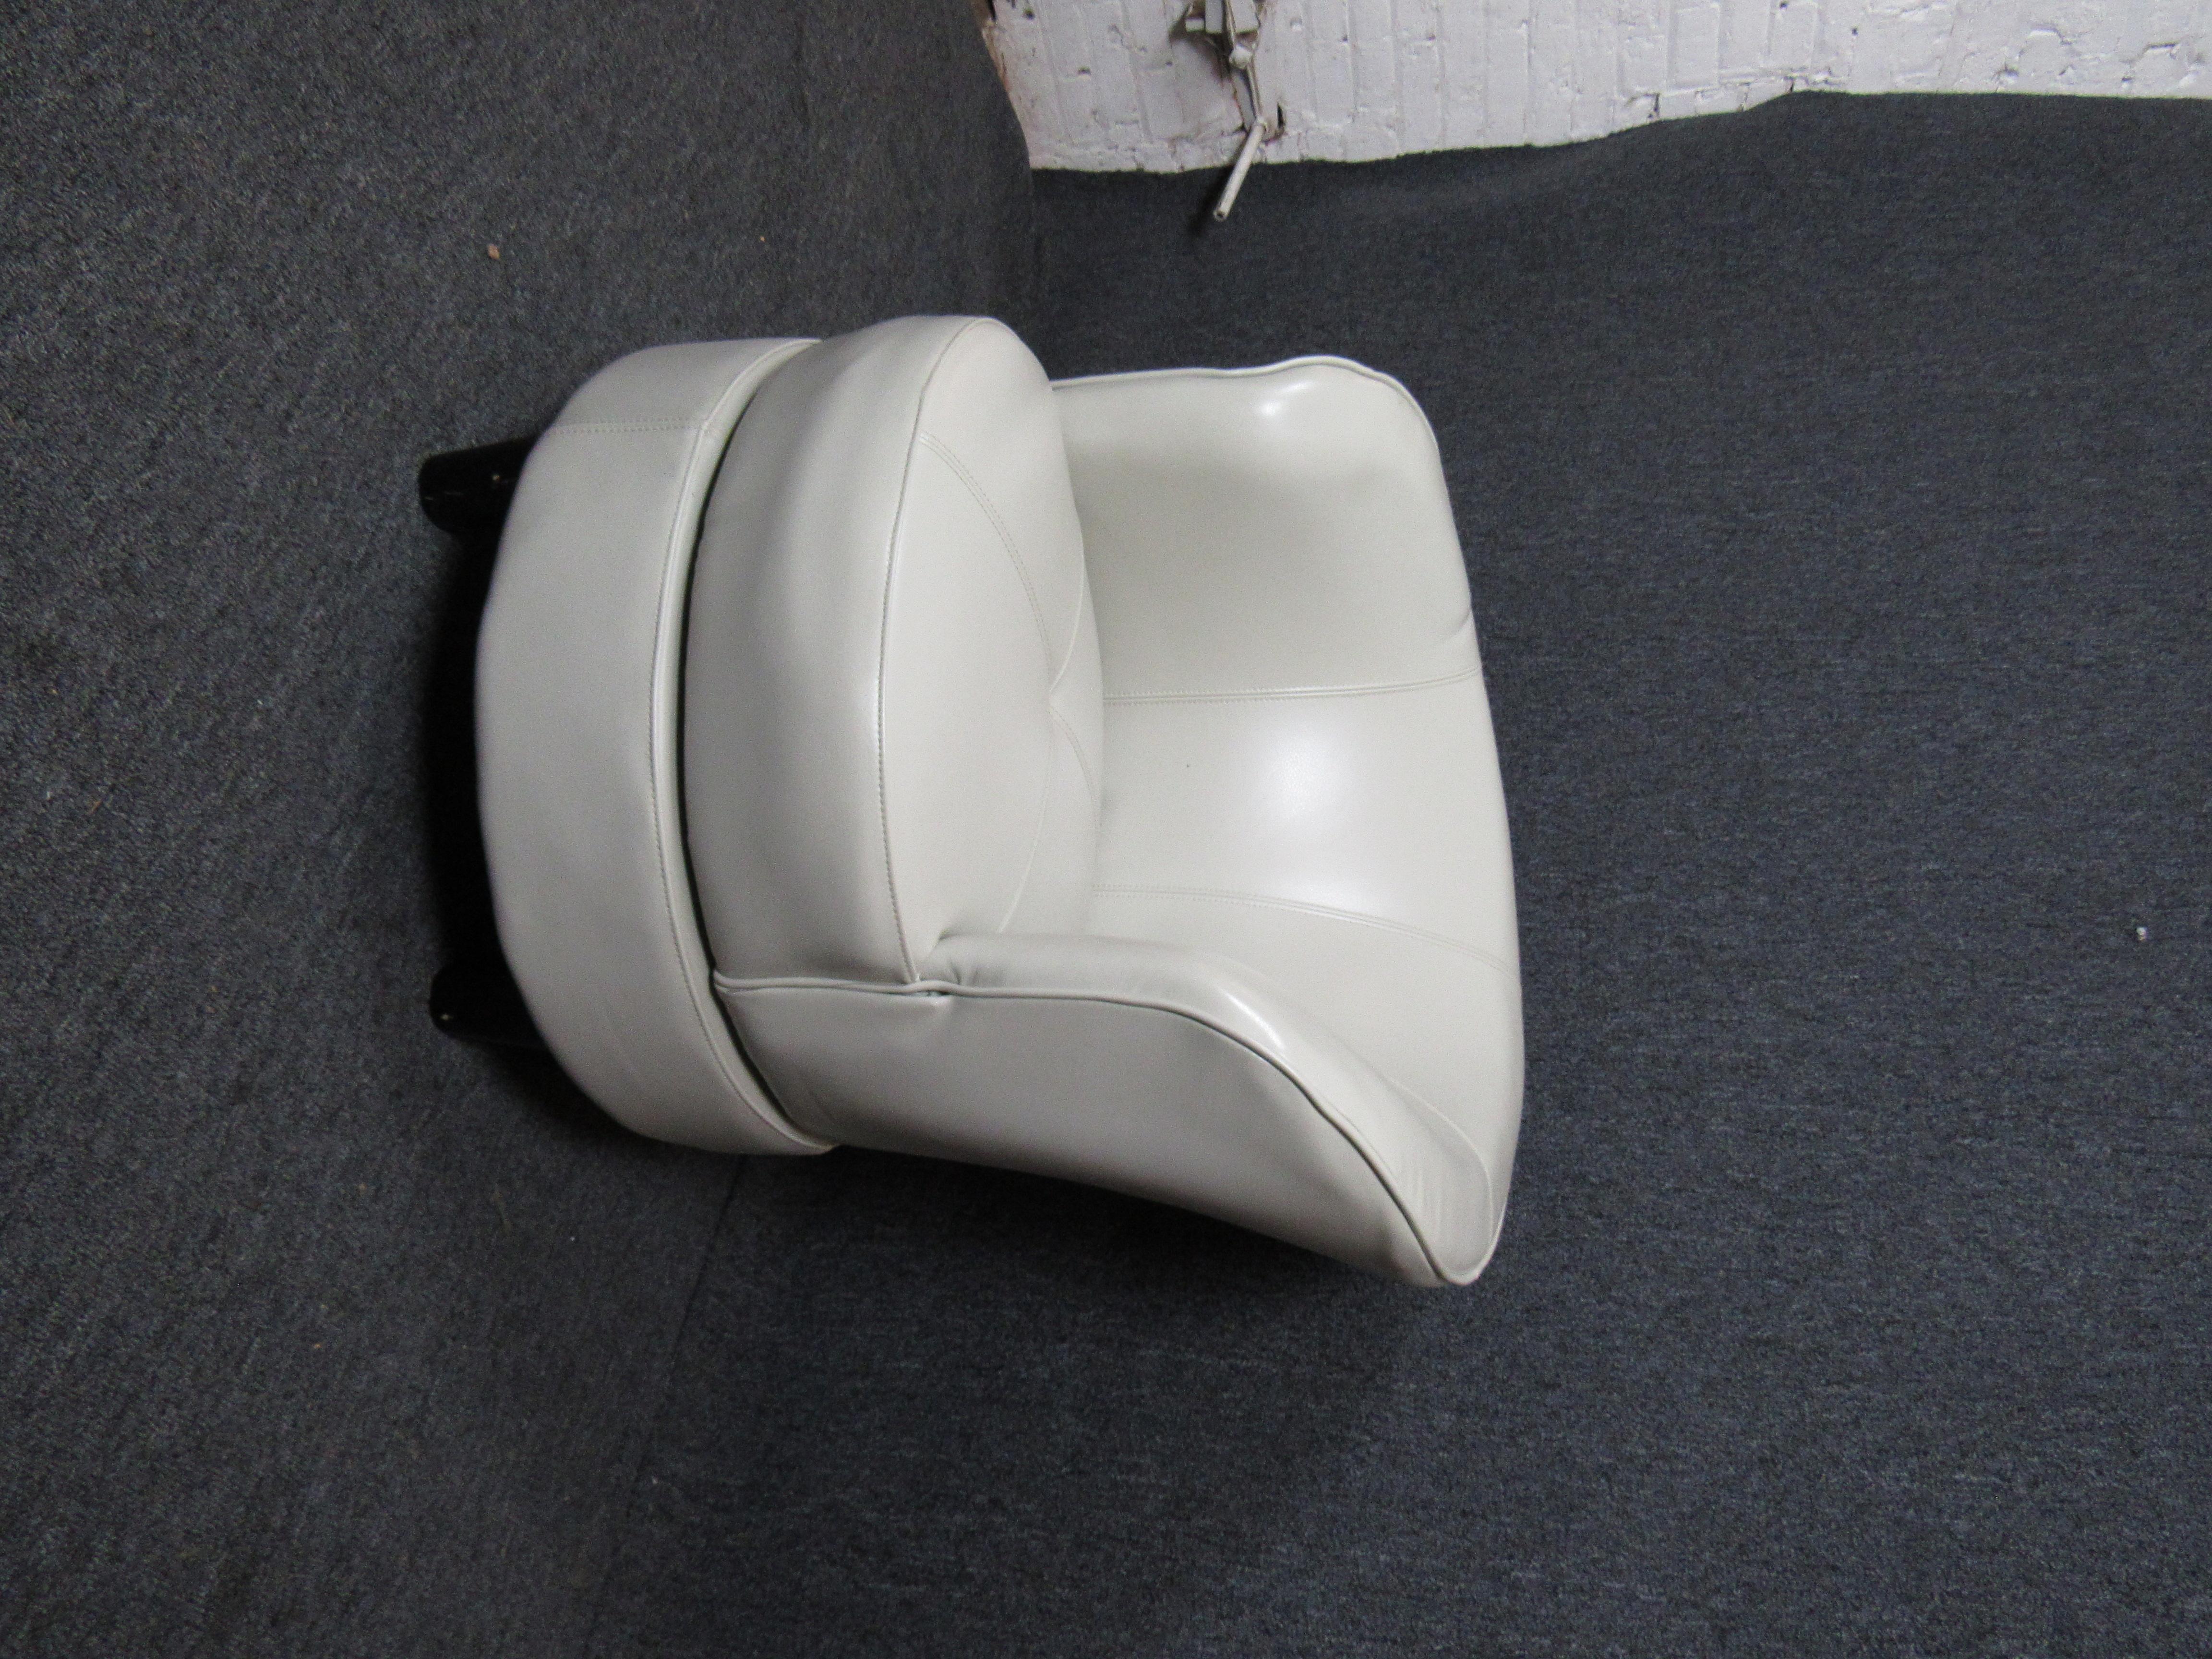 Gorgeous modern swivel chair covered in white vinyl fabric, this chair would make a great addition to any home or office.

(Please confirm item location - NY or NJ - with dealer)